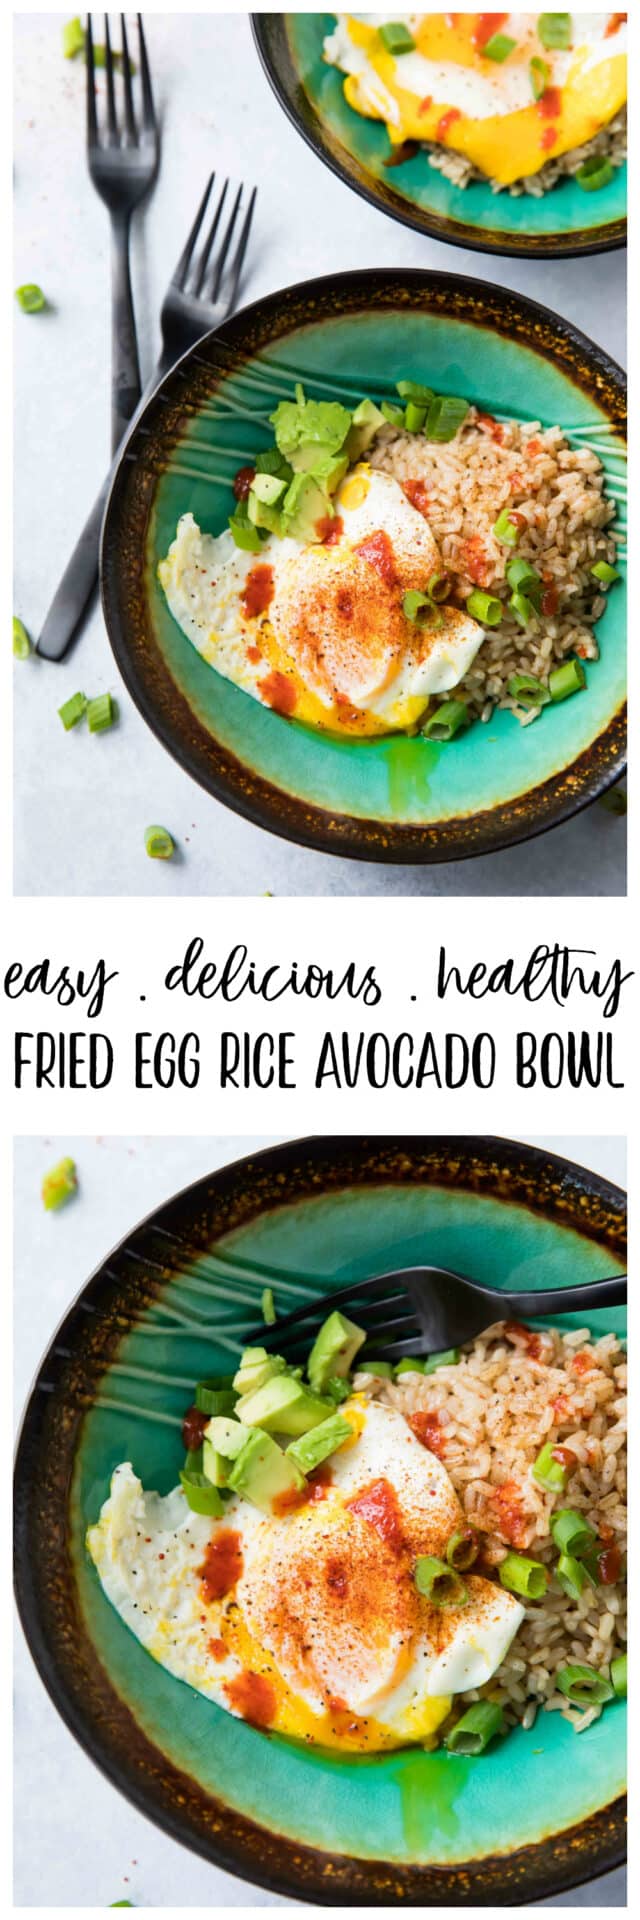 This hearty and filling Easy Fried Egg, Rice, Avocado Bowl will warm you up, fill you up, and STILL help you fit into your skinny jeans because it’s loaded with protein, fiber, and essential vitamins and minerals! 